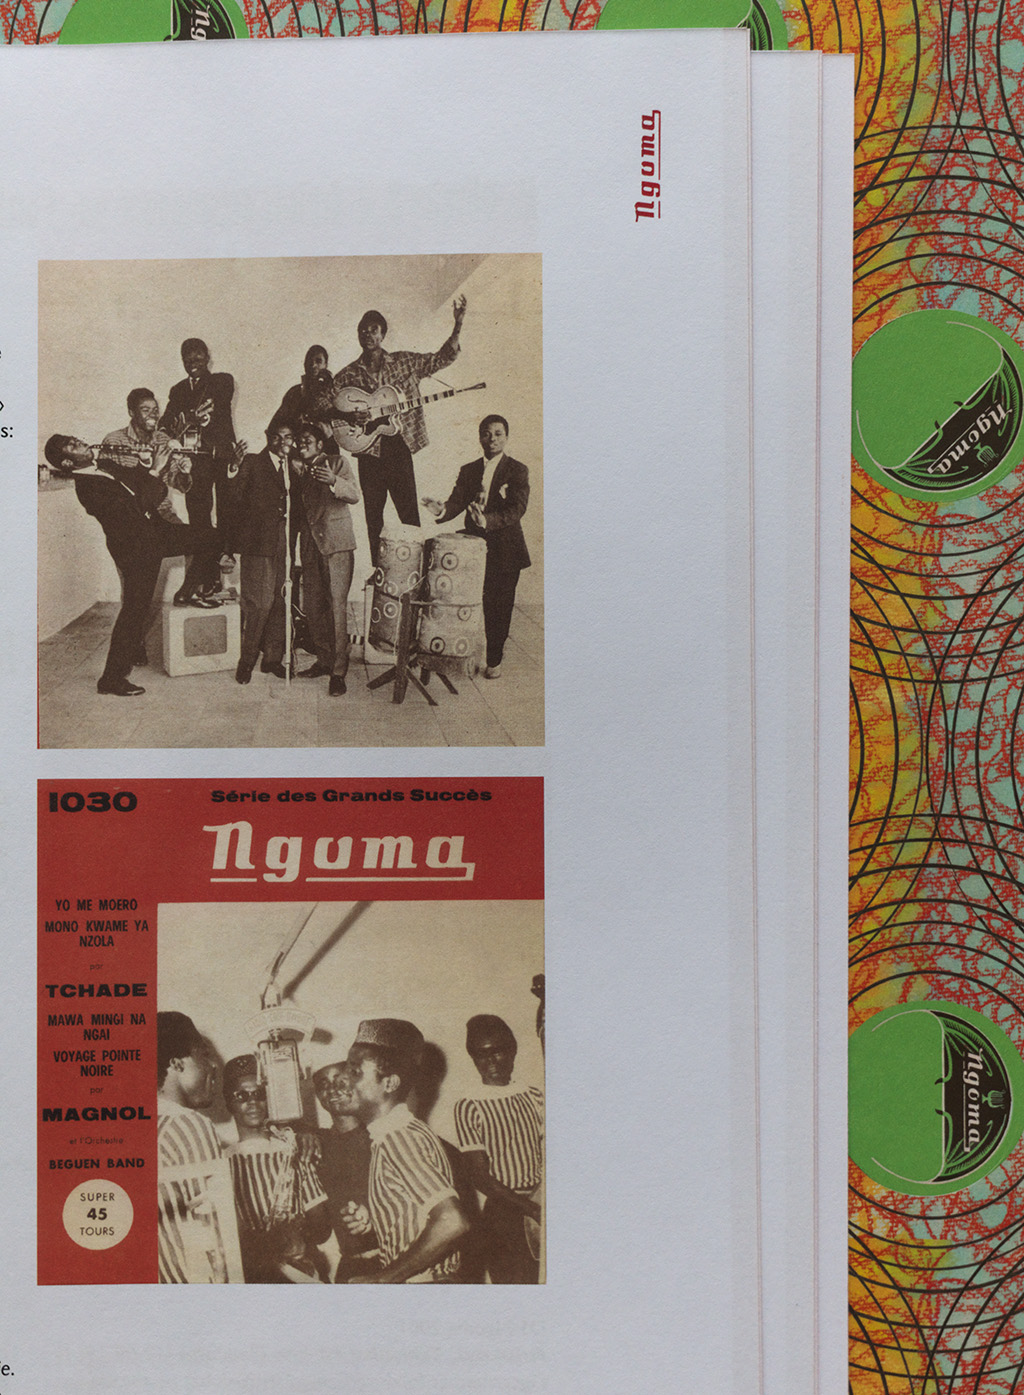 The Soul Of Congo - Treasures Of The Ngoma Label